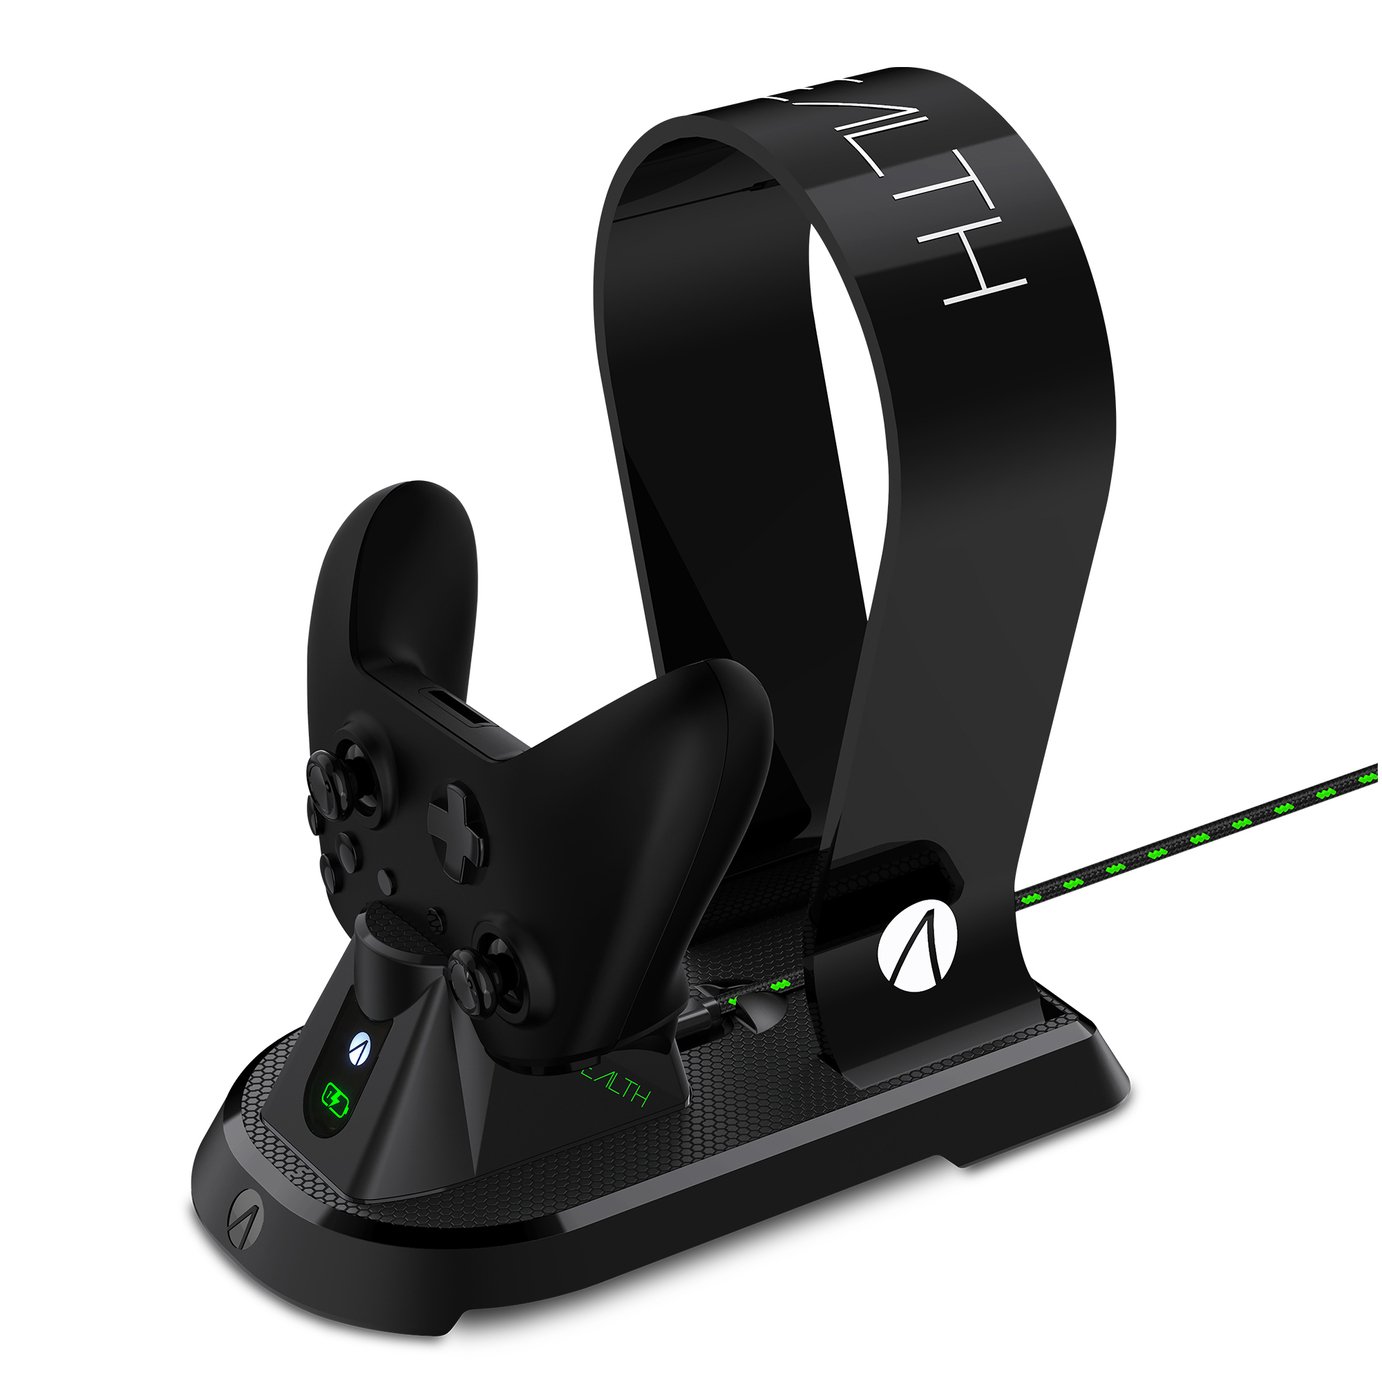 Stealth Xbox One Dock & Charging Station with Headset Stand Review